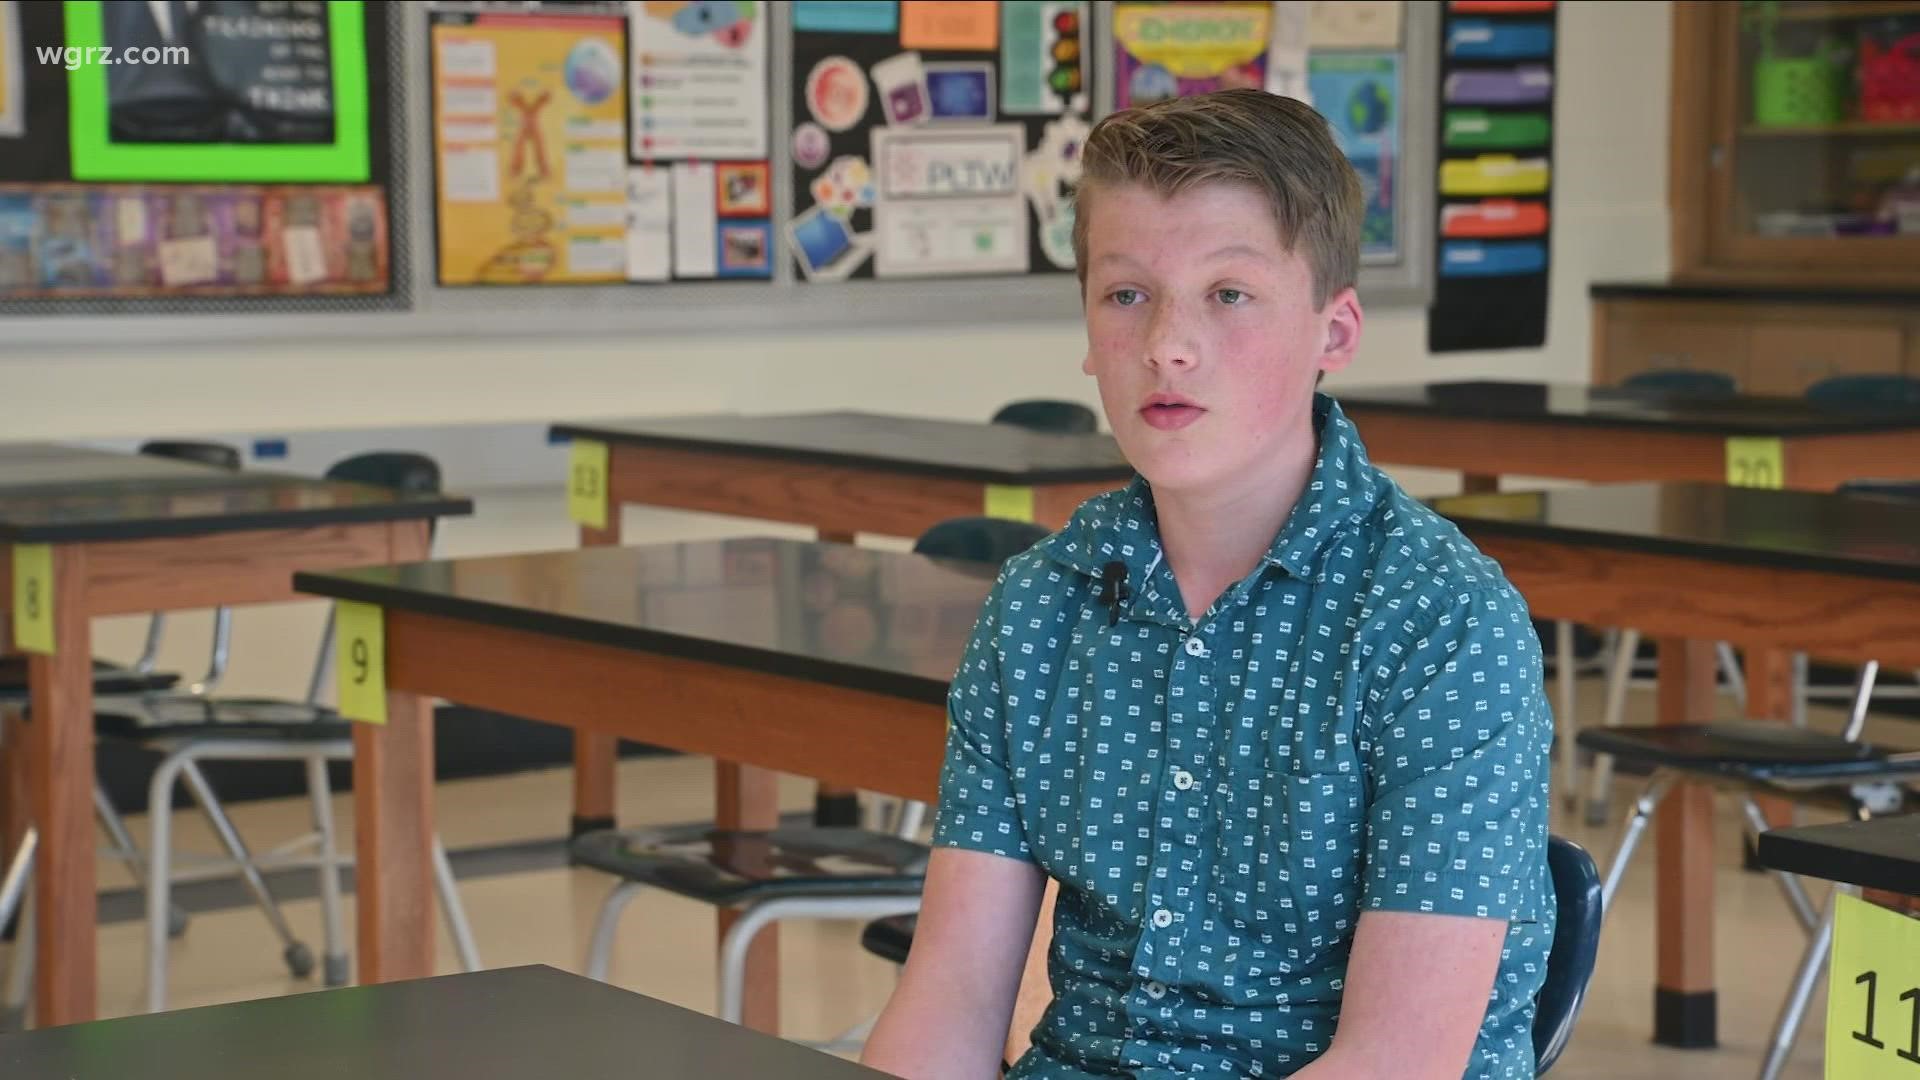 Reuben is an eighth-grade student at Starpoint Middle School and Channel 2's STEM Star of the Month for April 2022.